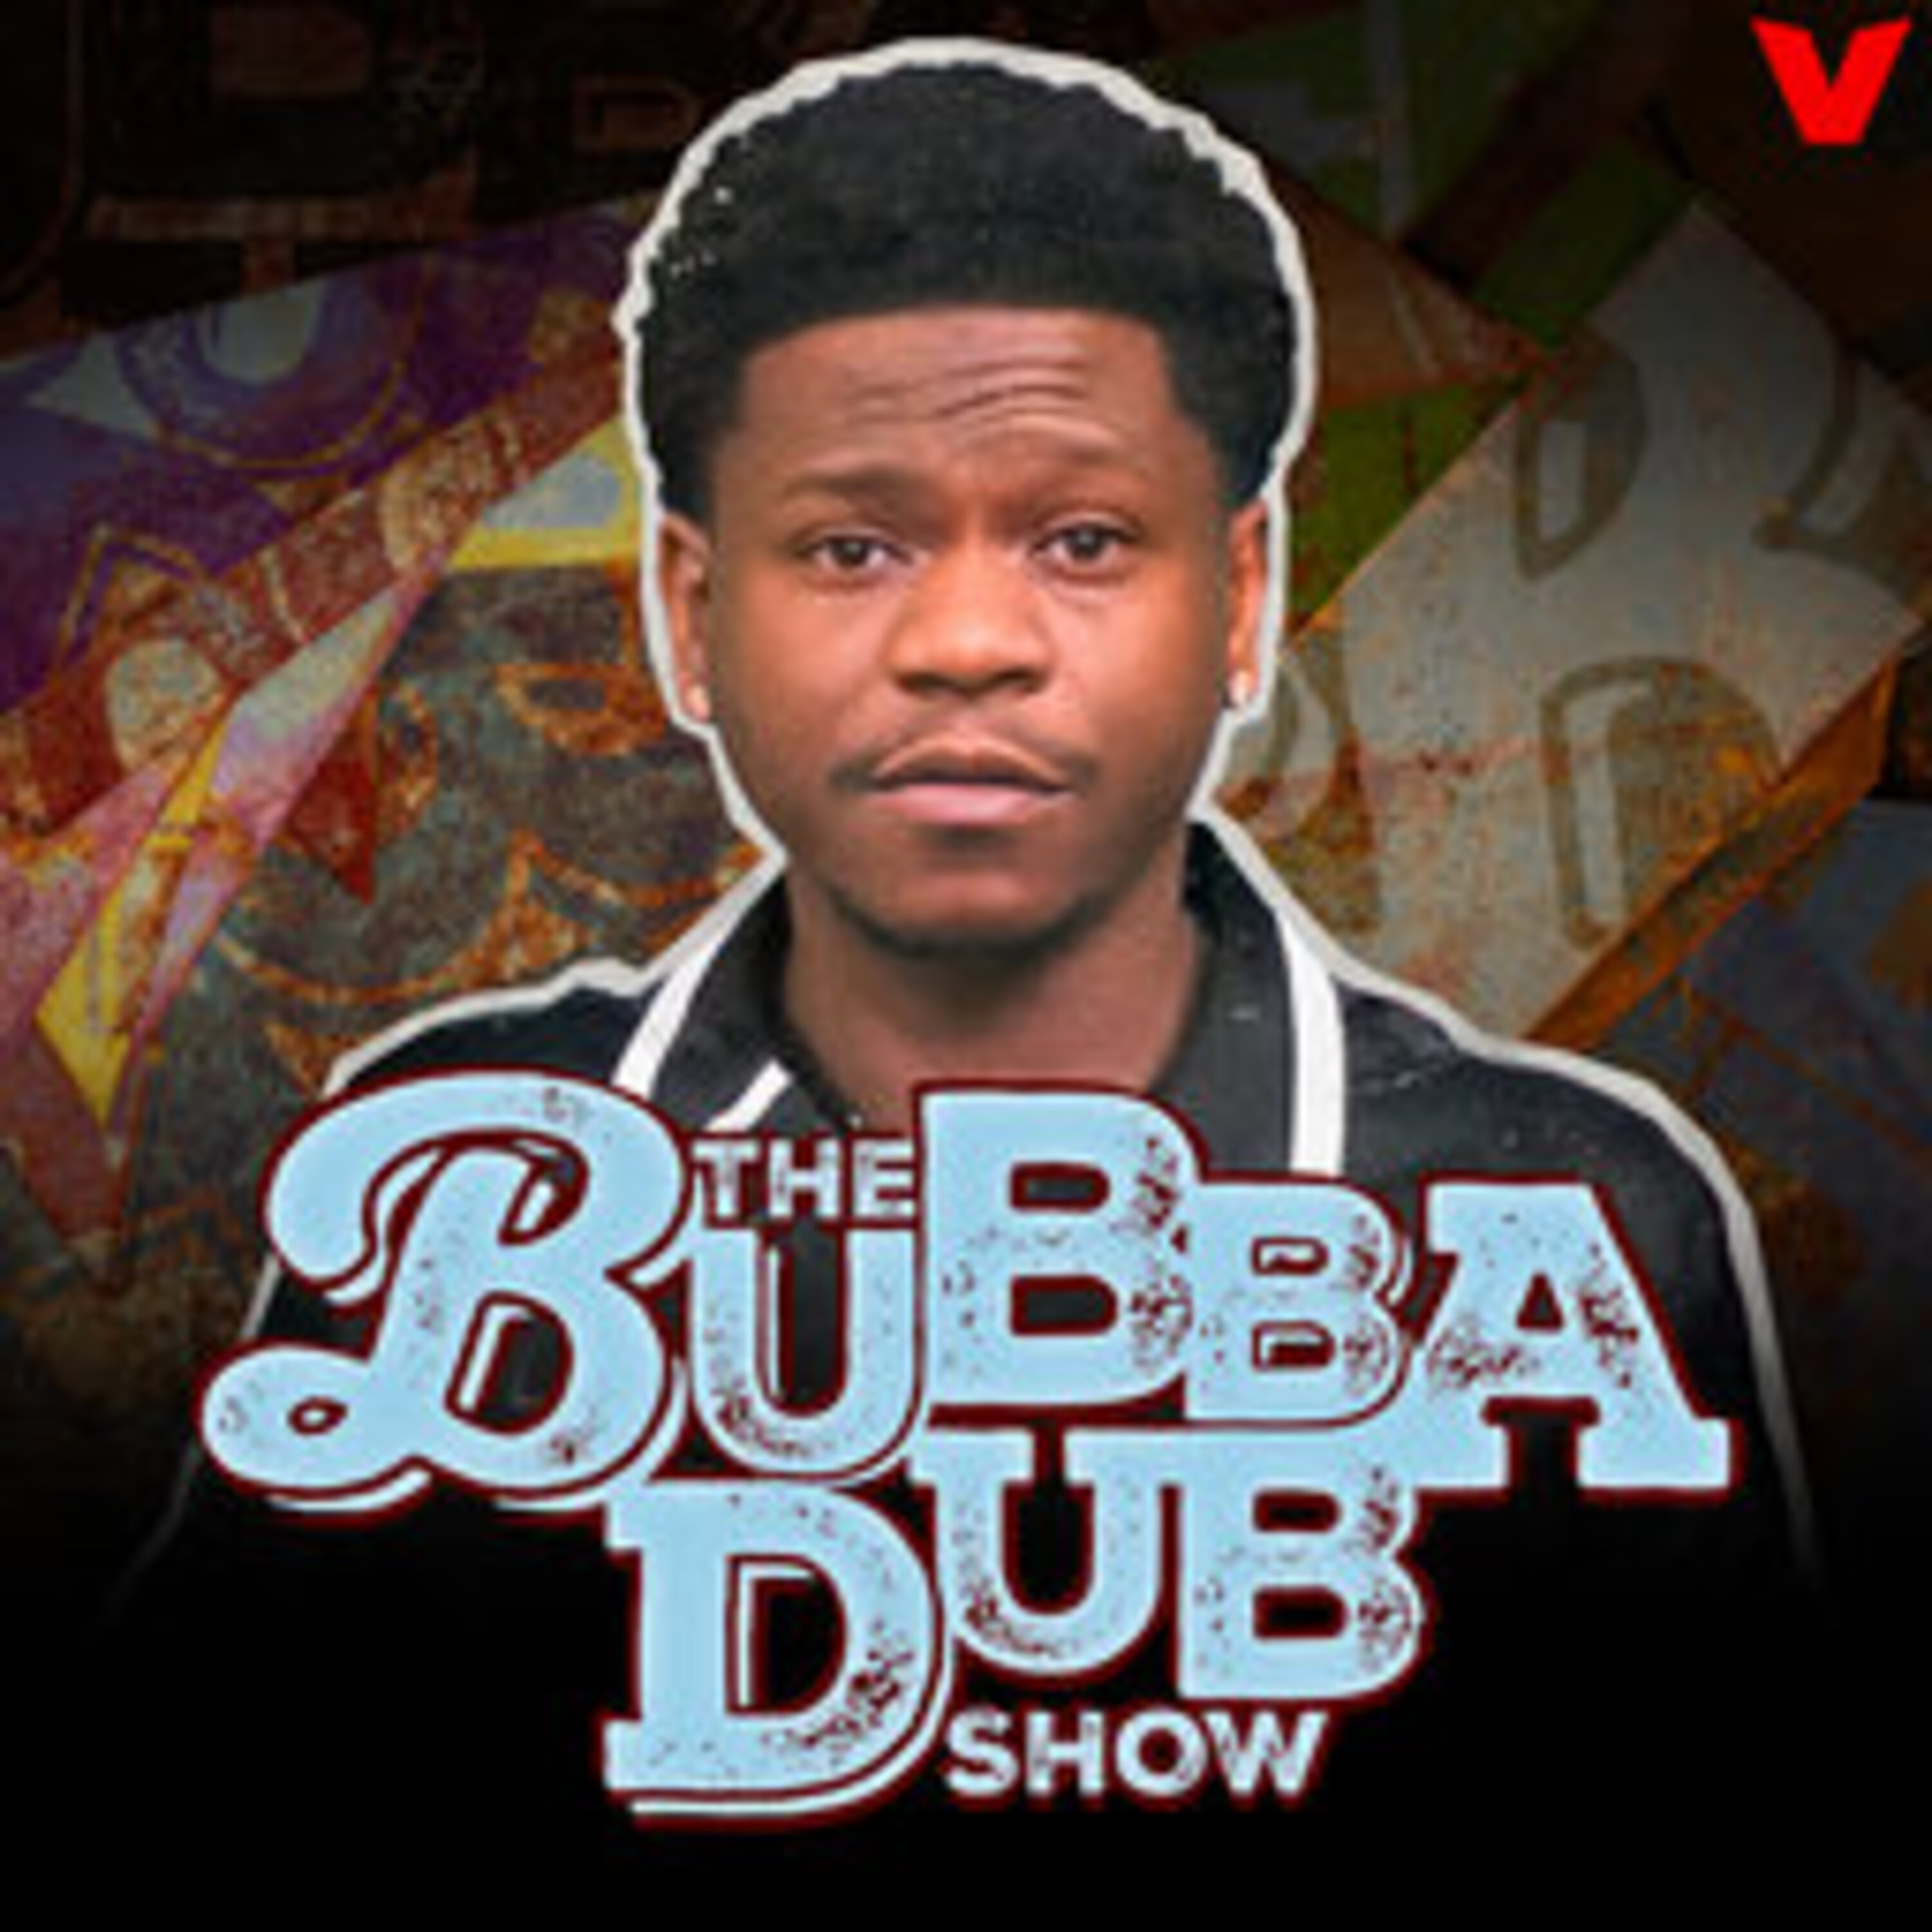 The Bubba Dub Show - How The Lakers Win It All, Fixing Tiger’s Game, Allen Iverson Statue, Trash of the Week by iHeartPodcasts and The Volume